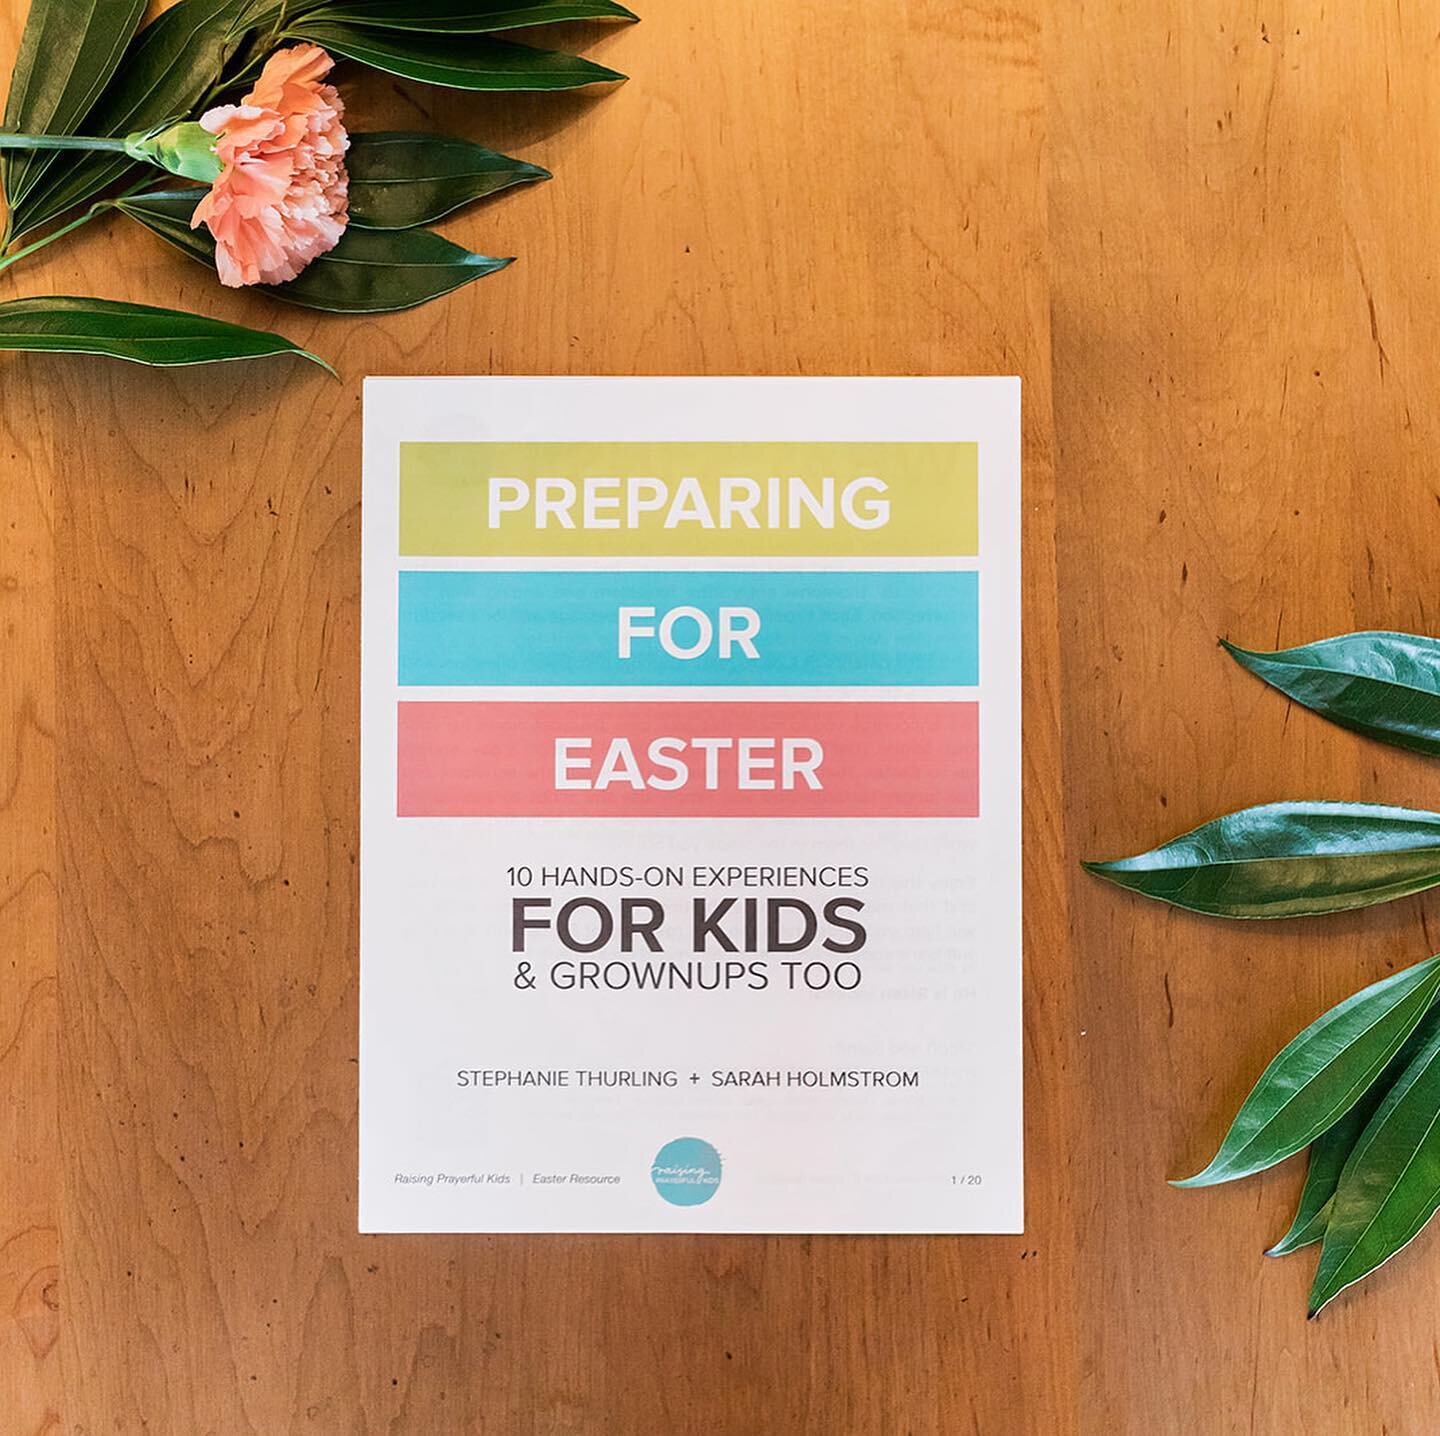 Easter is April 4th this year! And it is fast approaching! Have you downloaded our free Preparing For Easter family booklet?!

It&rsquo;s 10 hands-on experiences for families to do together to learn about Easter! There are 10 activities that include 